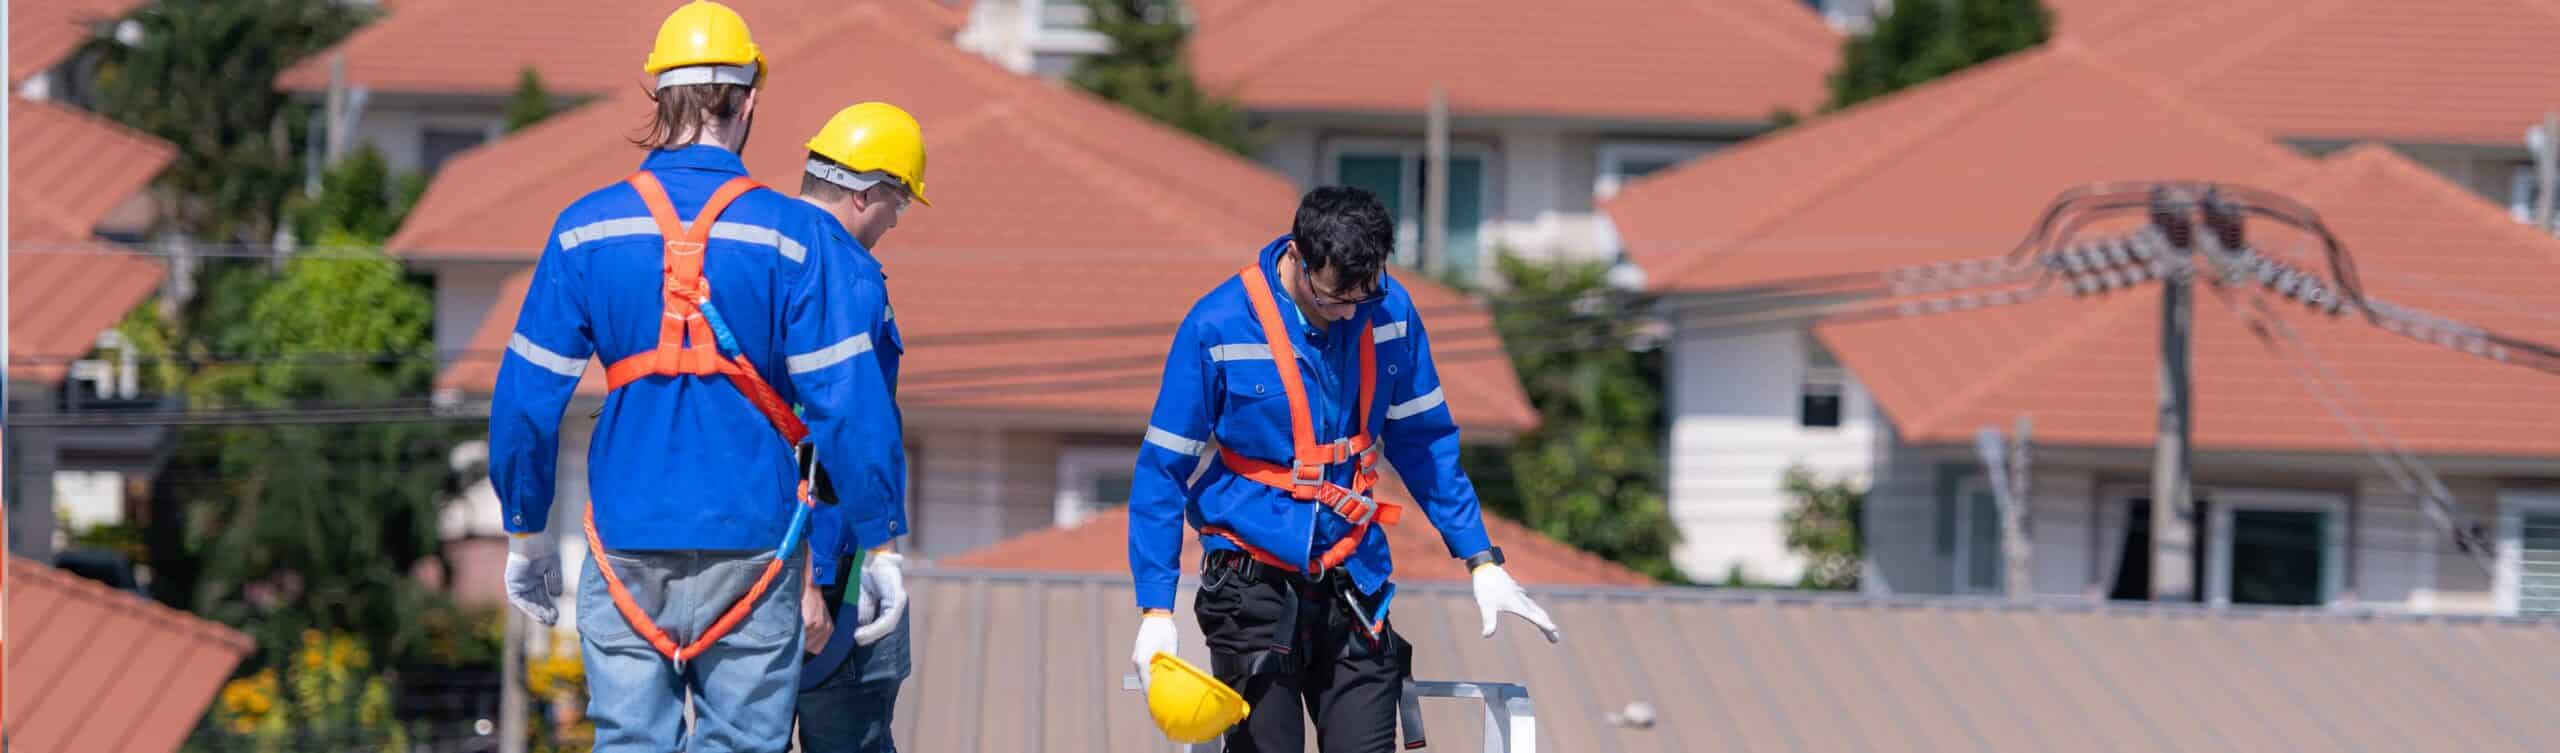 The Importance Of Harnesses For Roof Work